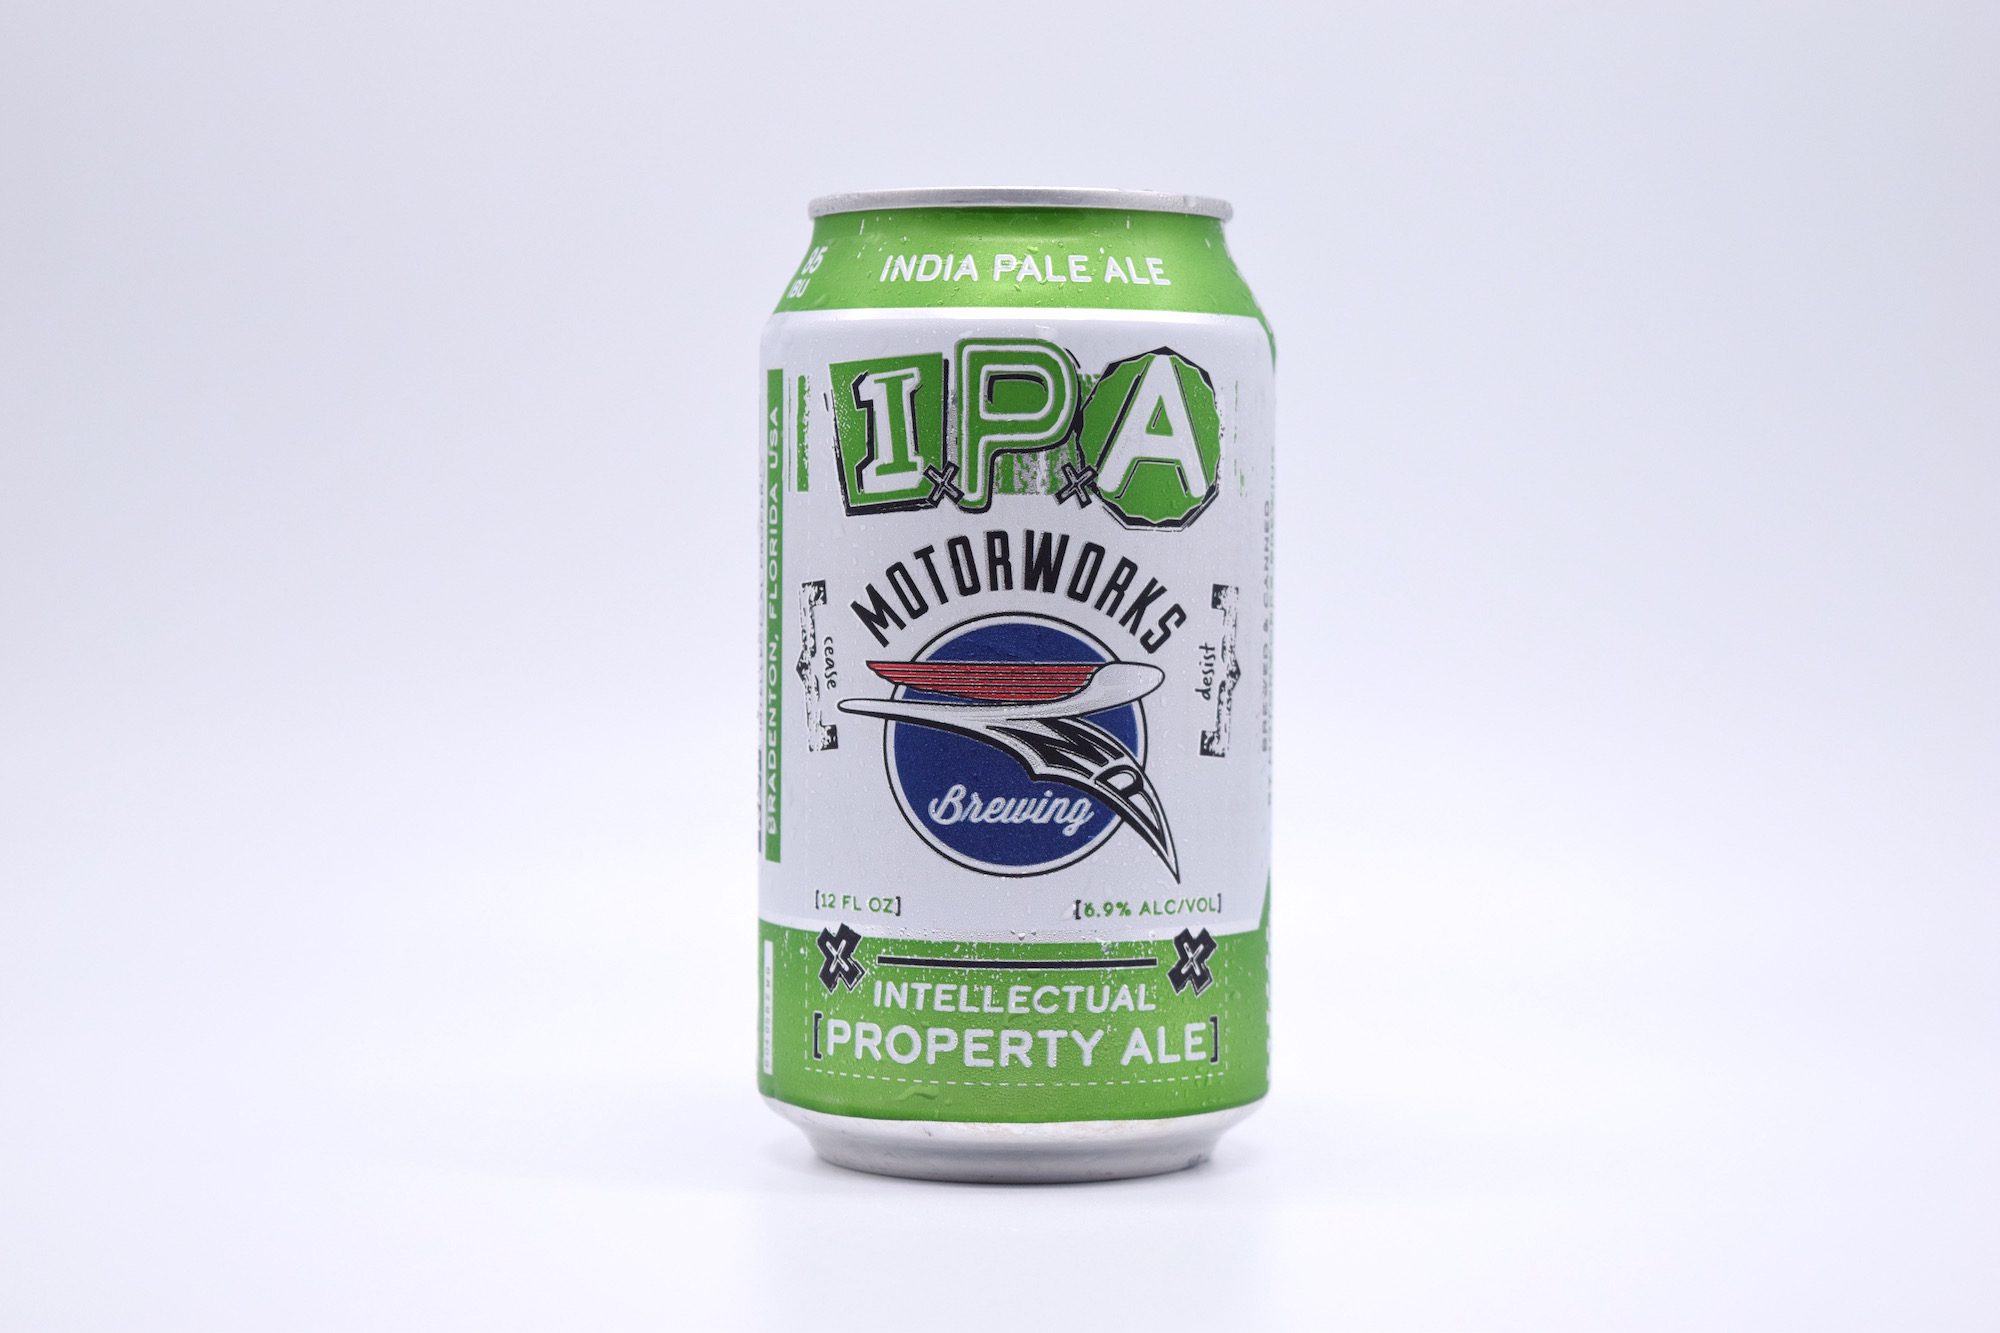 Intellectual Property Ale - IPA in a can by Motorworks Brewing